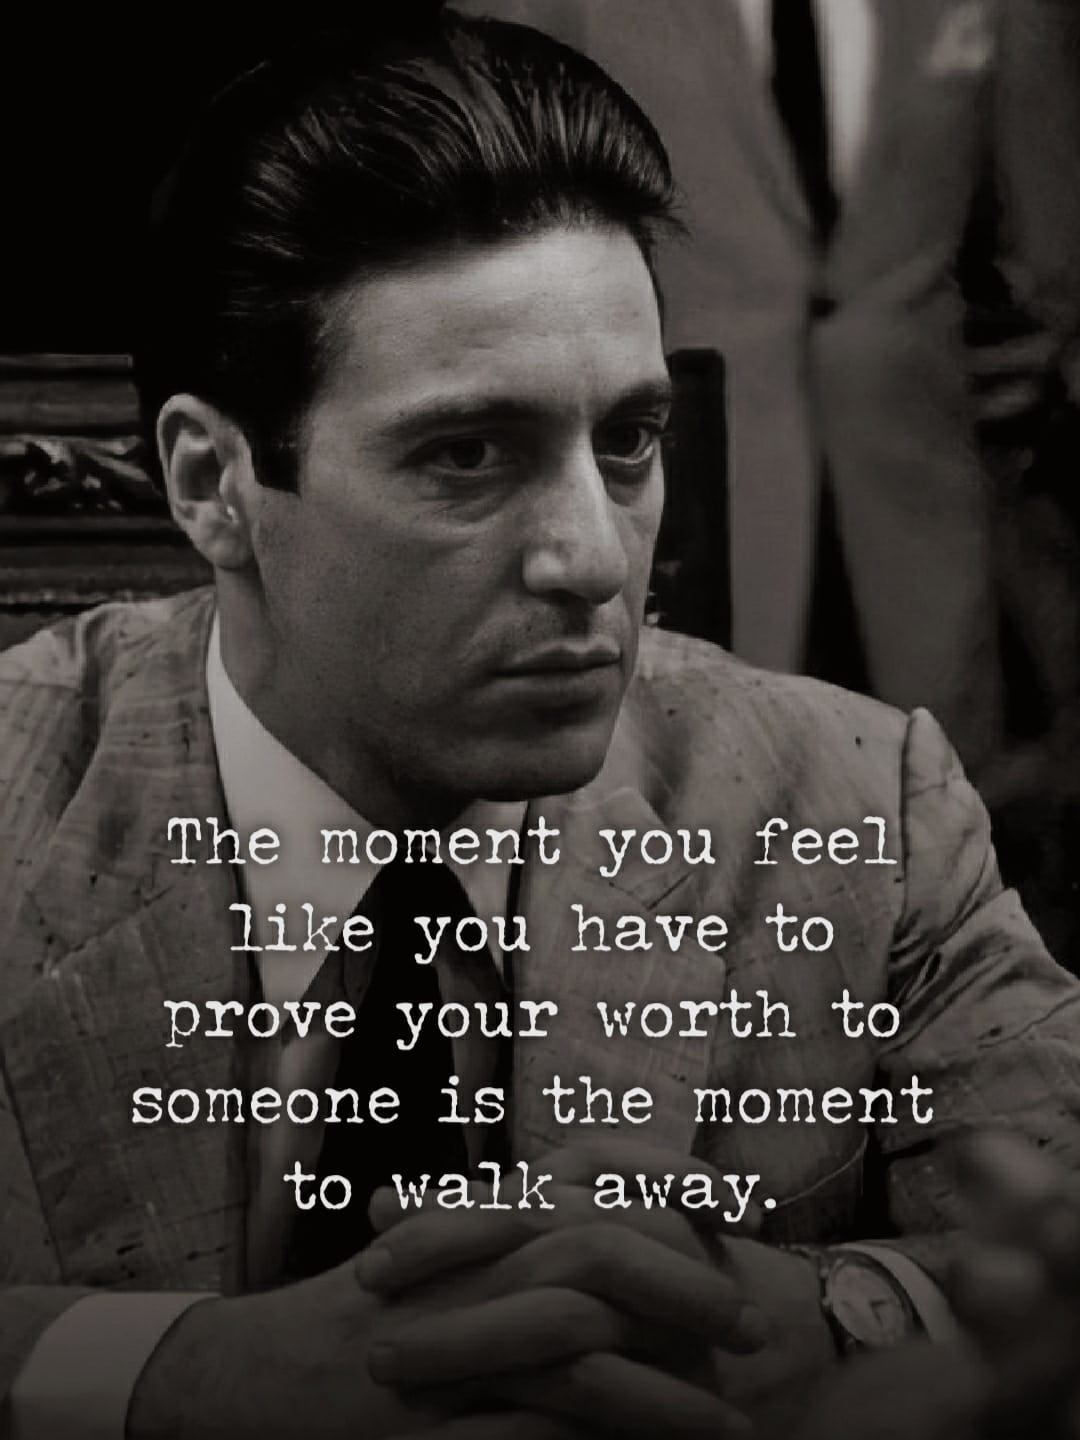 the moment you feel like you have to prove your worth to someone is the moment to walk away